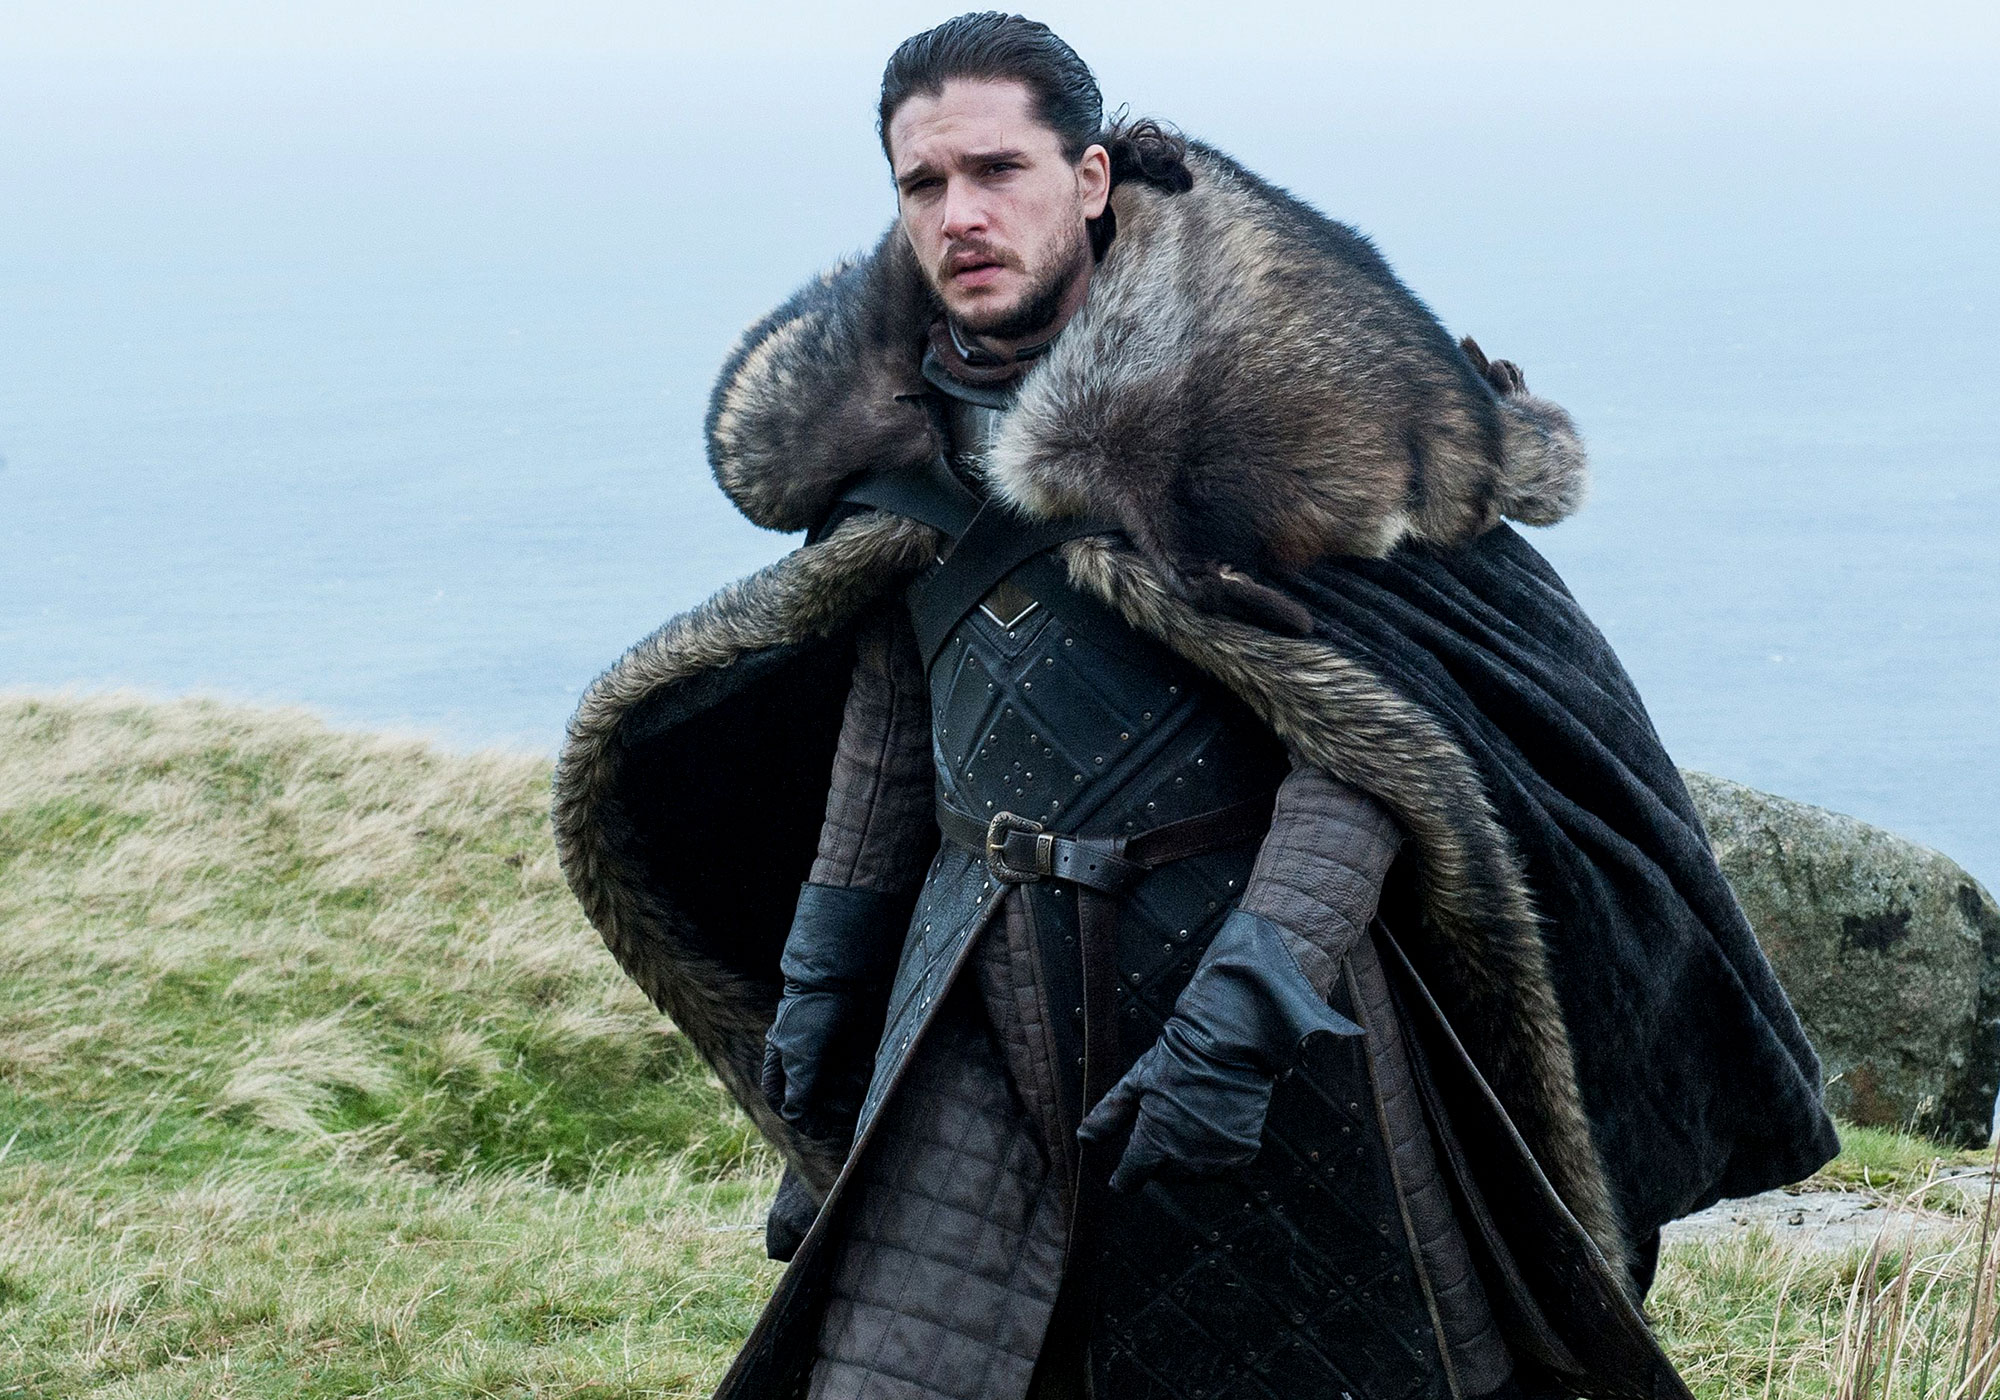 Years Ahead of His 'Game of Thrones' Sequel Announcement, Kit Harington  Declared He Would Never Return as Jon Snow — 'Not On Your Life